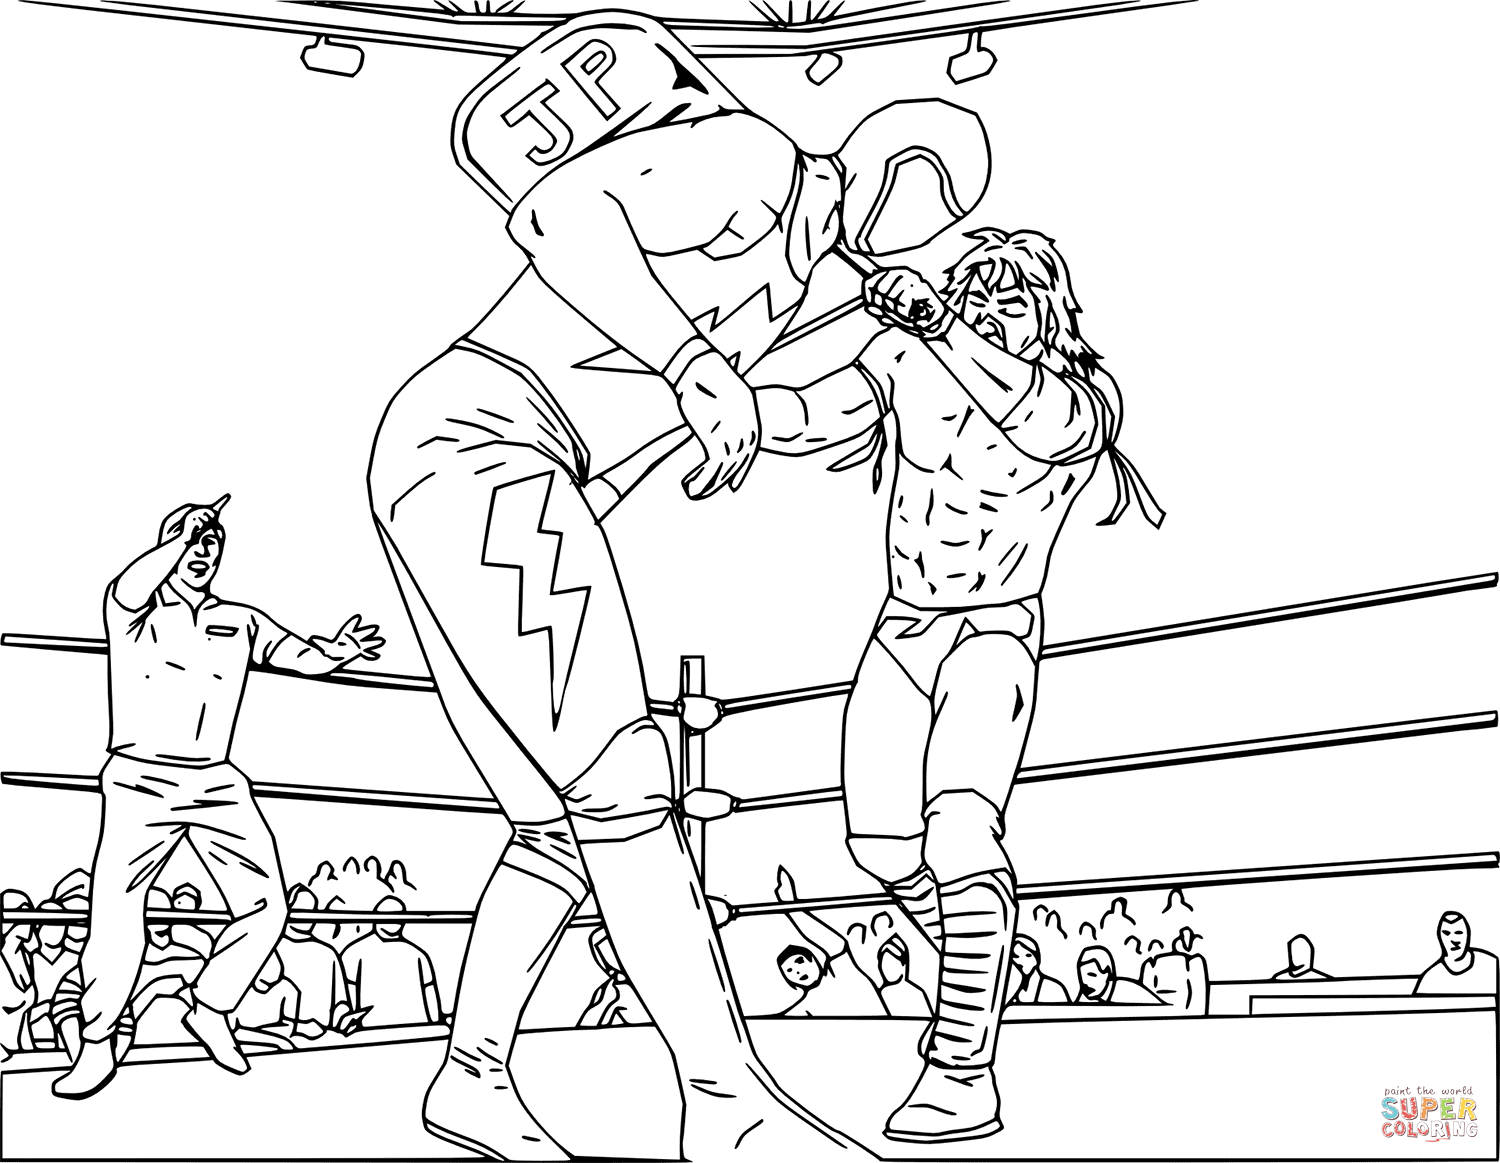 Wwe wrestling fight coloring page free printable coloring pages